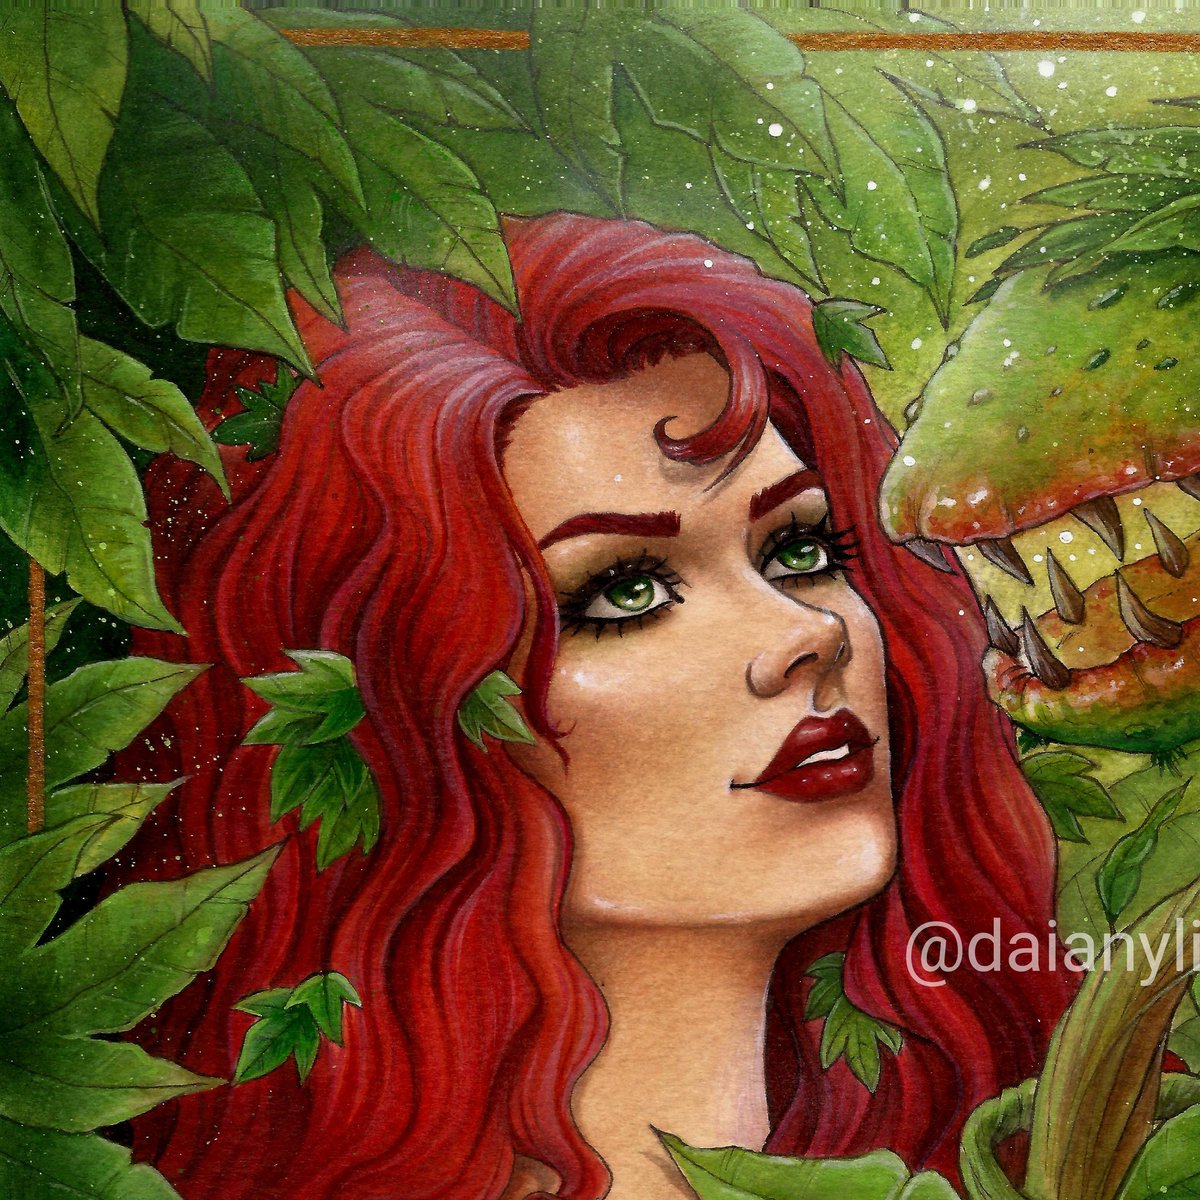 Poison Ivy Finished 😊 💚🌿
More drawings on this link: instagram.com/daianylima._?u…

#comissionopen #comiccollector  #artcollector #watercolor #indianink